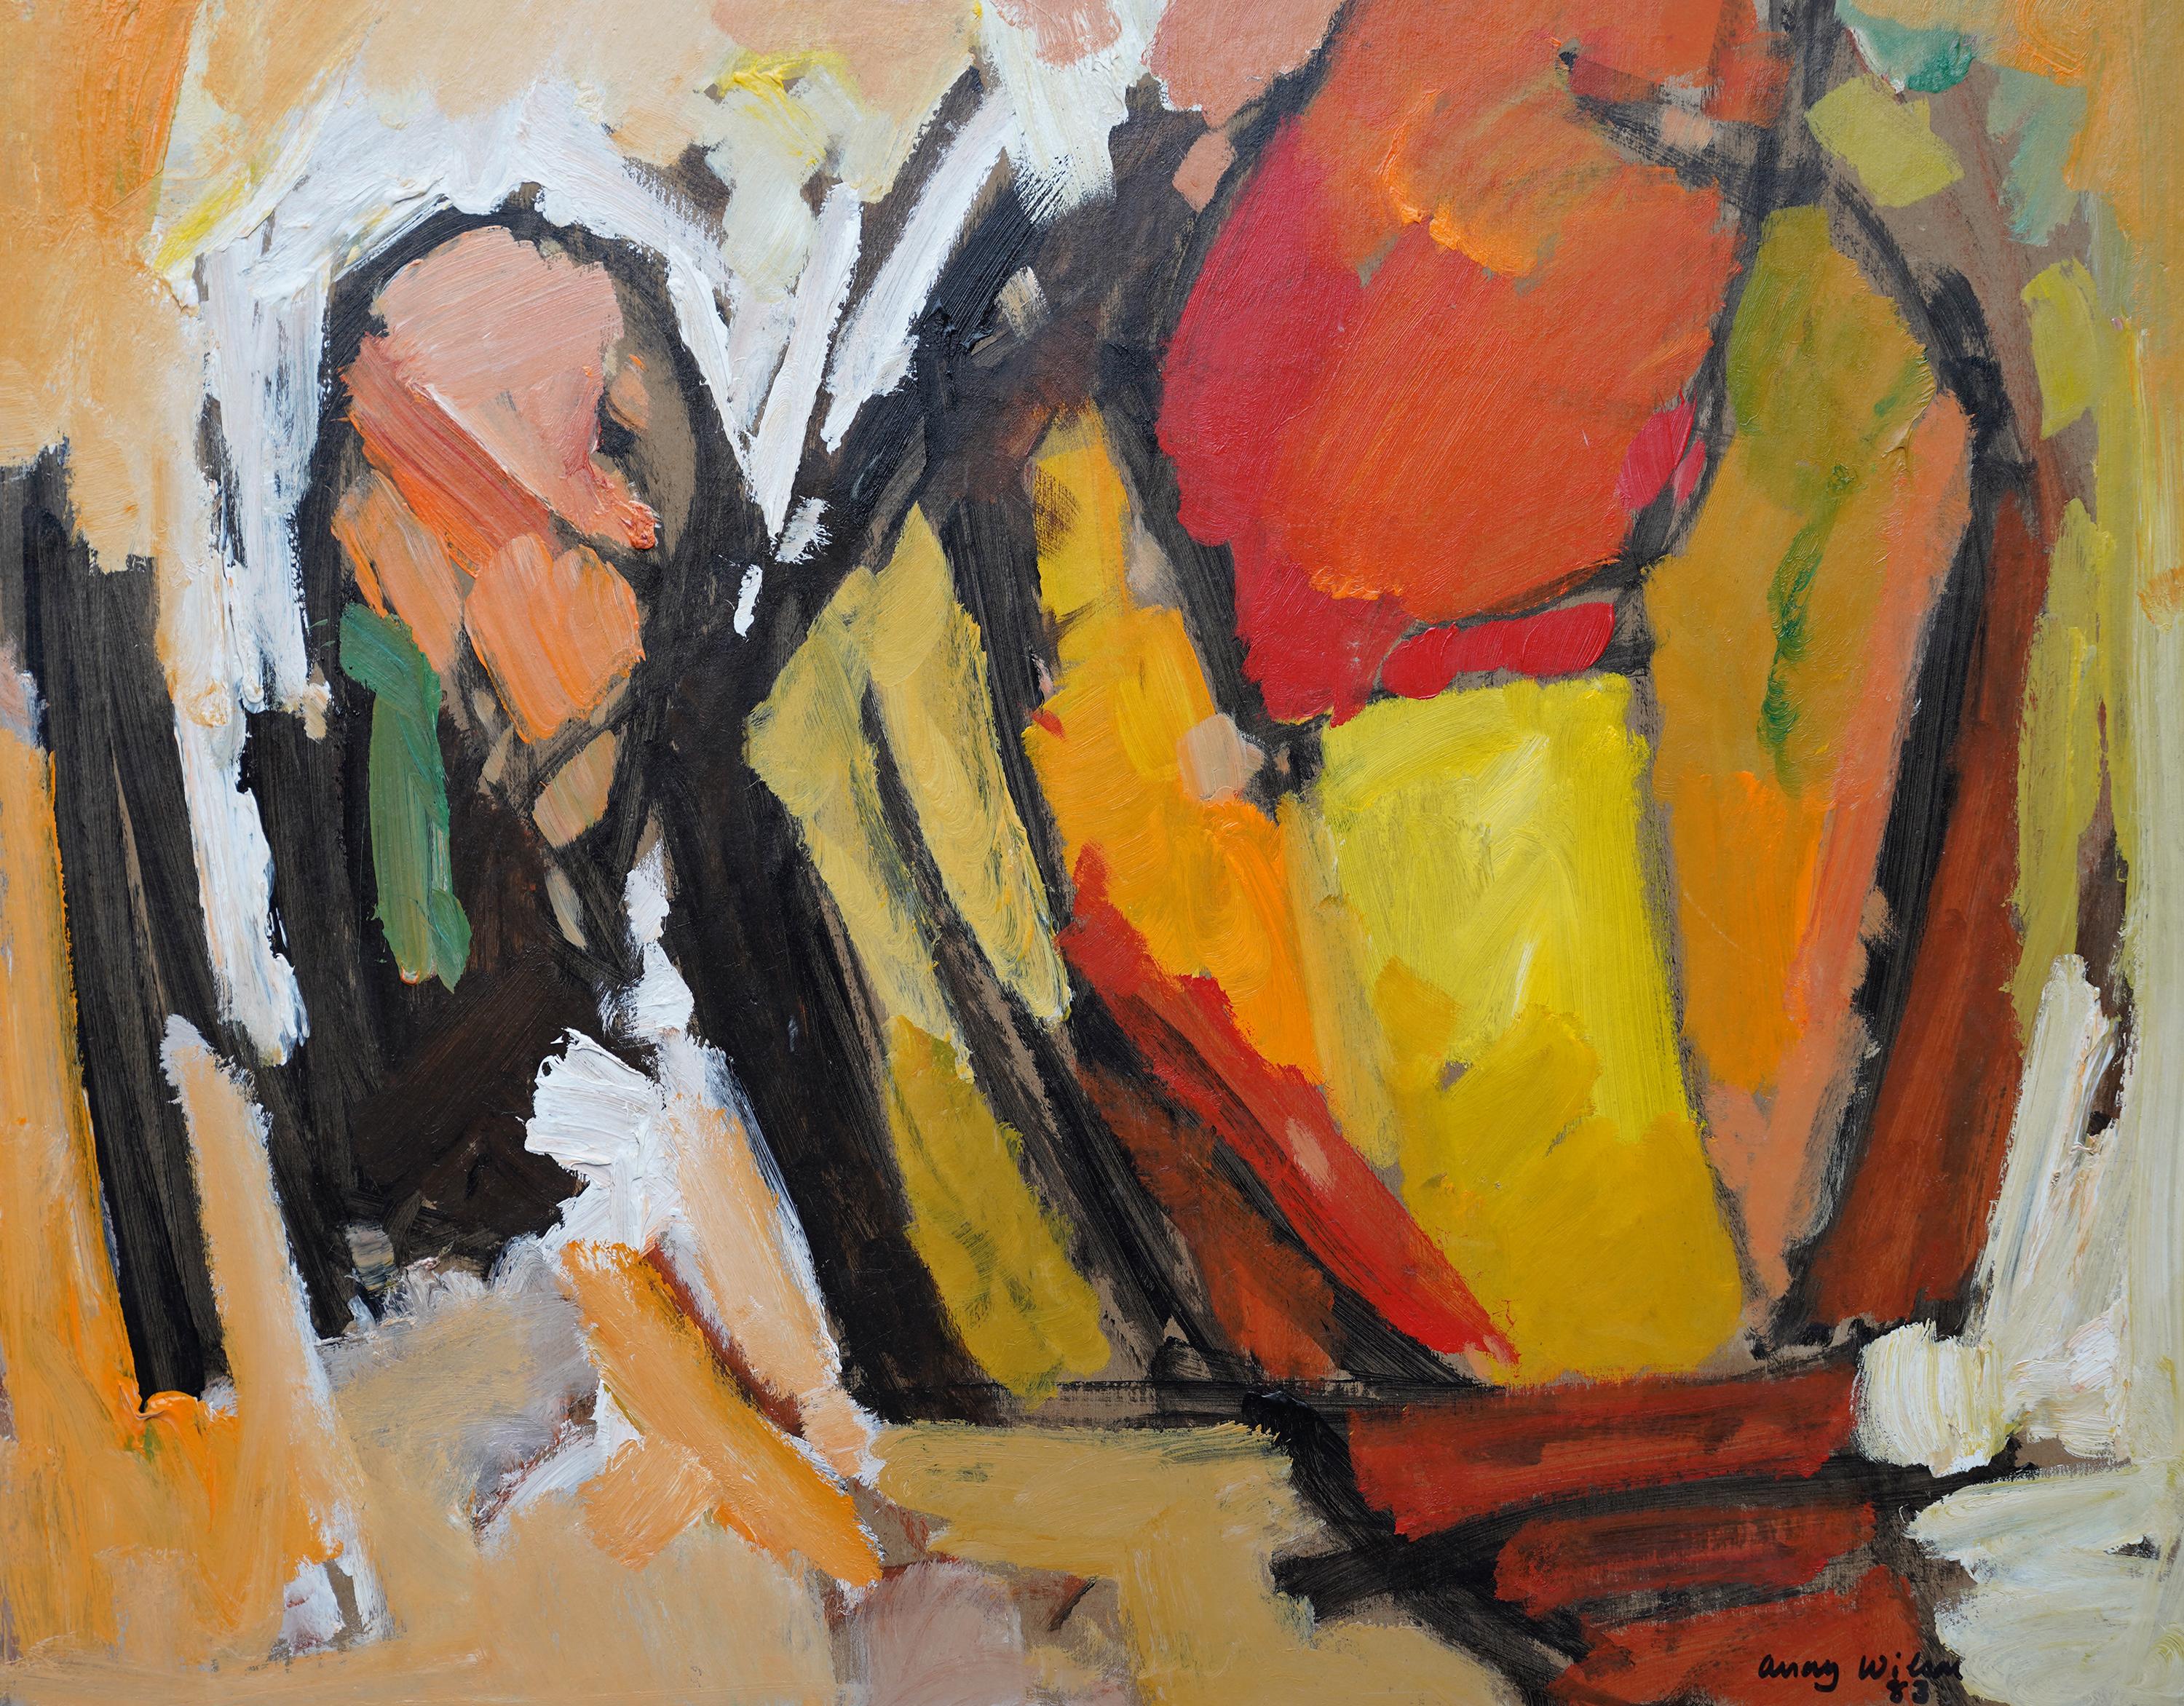 Abstract '83 - Orange Yellow - British 20th century Action art oil painting - Painting by Frank Avray Wilson 